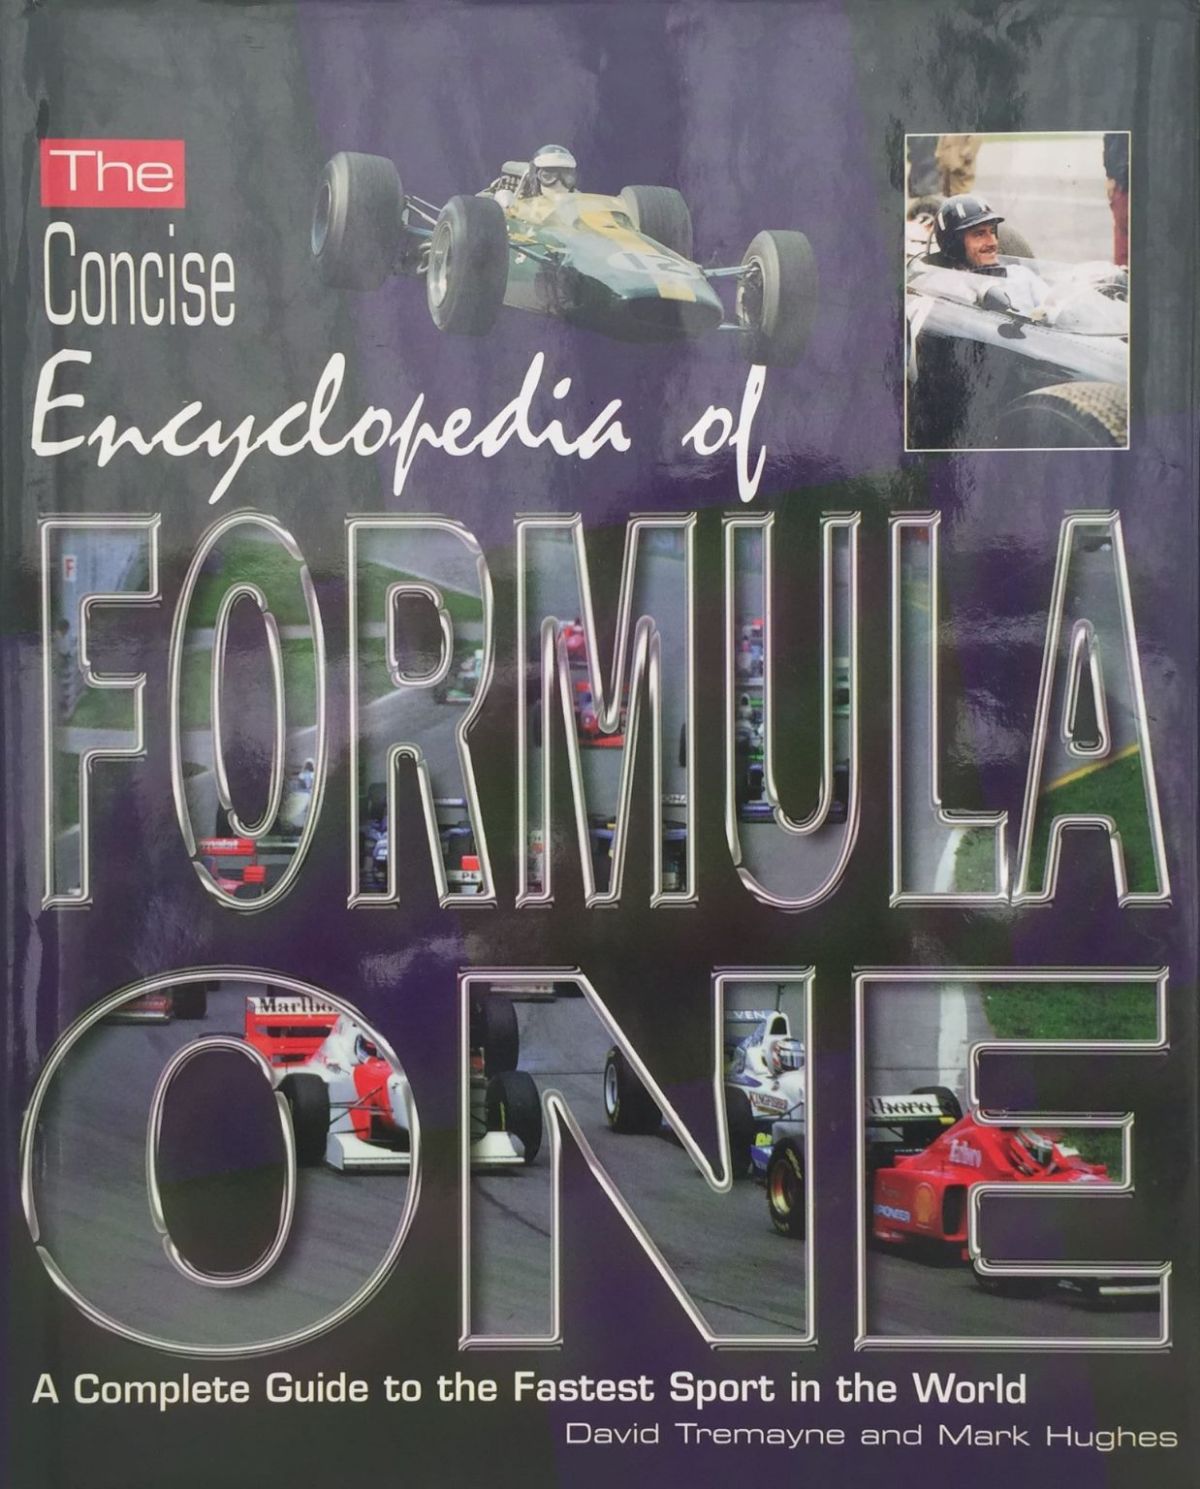 FORMULA ONE: The Concise Encyclopedia of 